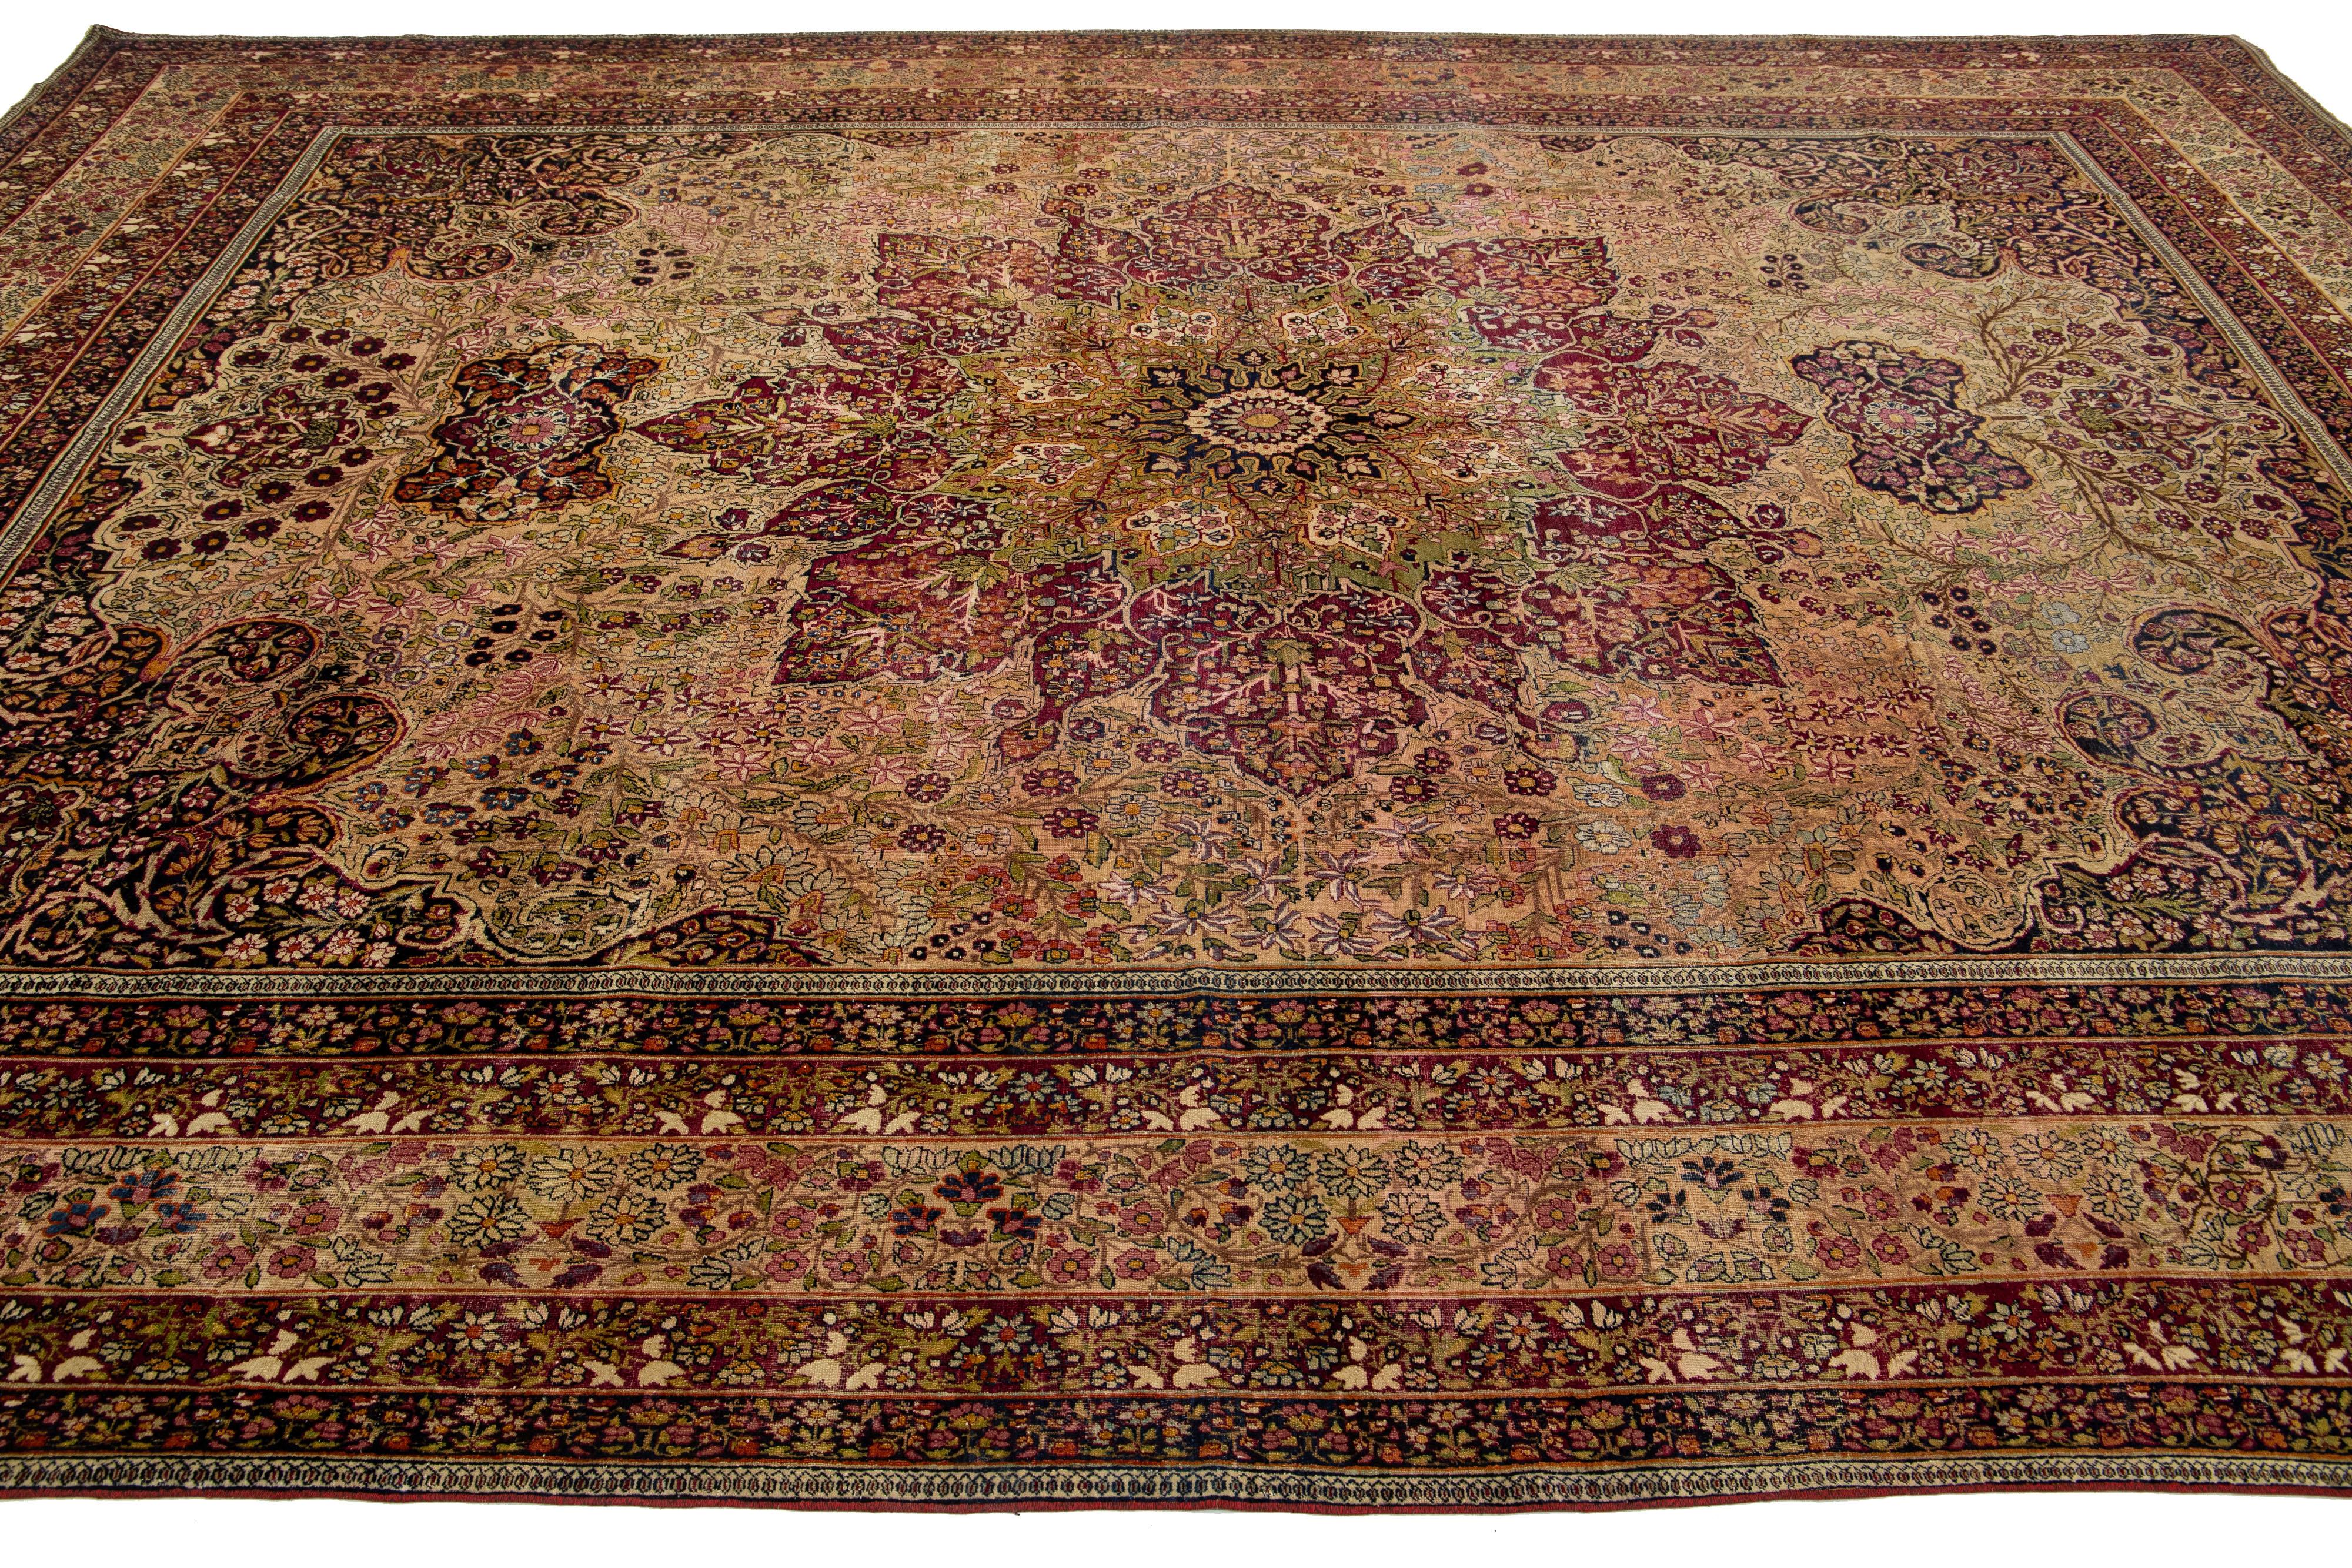 1880s Antique Persian Kerman Red Wool Rug Handmade Featuring a Rosette Motif  In Good Condition For Sale In Norwalk, CT